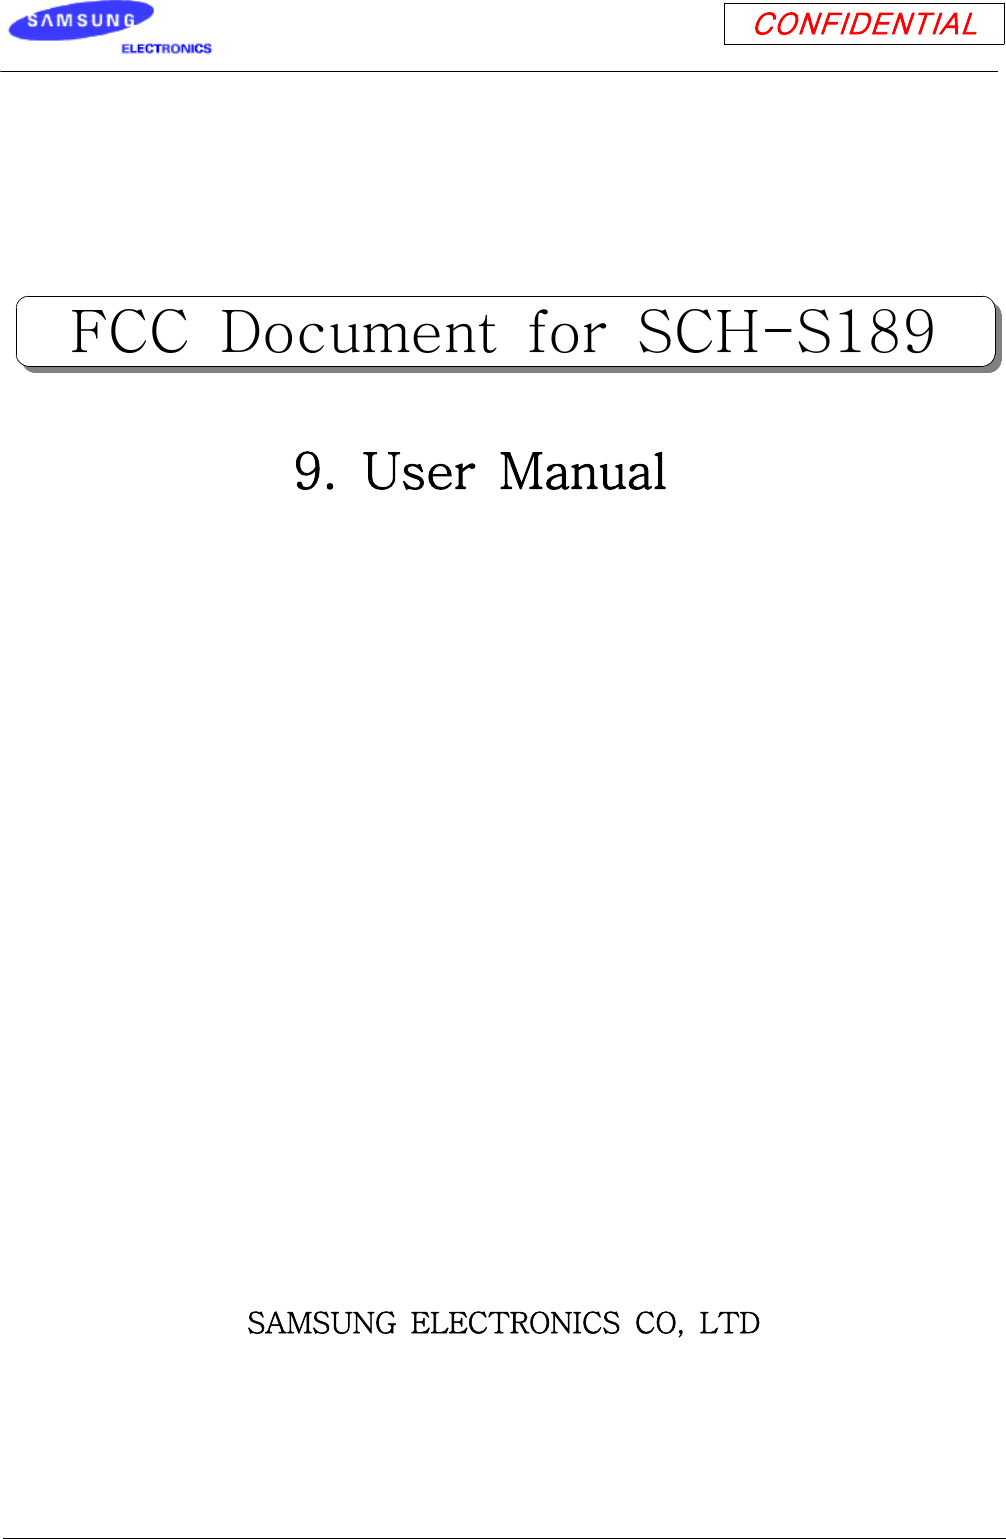 CONFIDENTIAL9. User Manual SAMSUNG ELECTRONICS CO, LTDFCC Document for SCH-S189